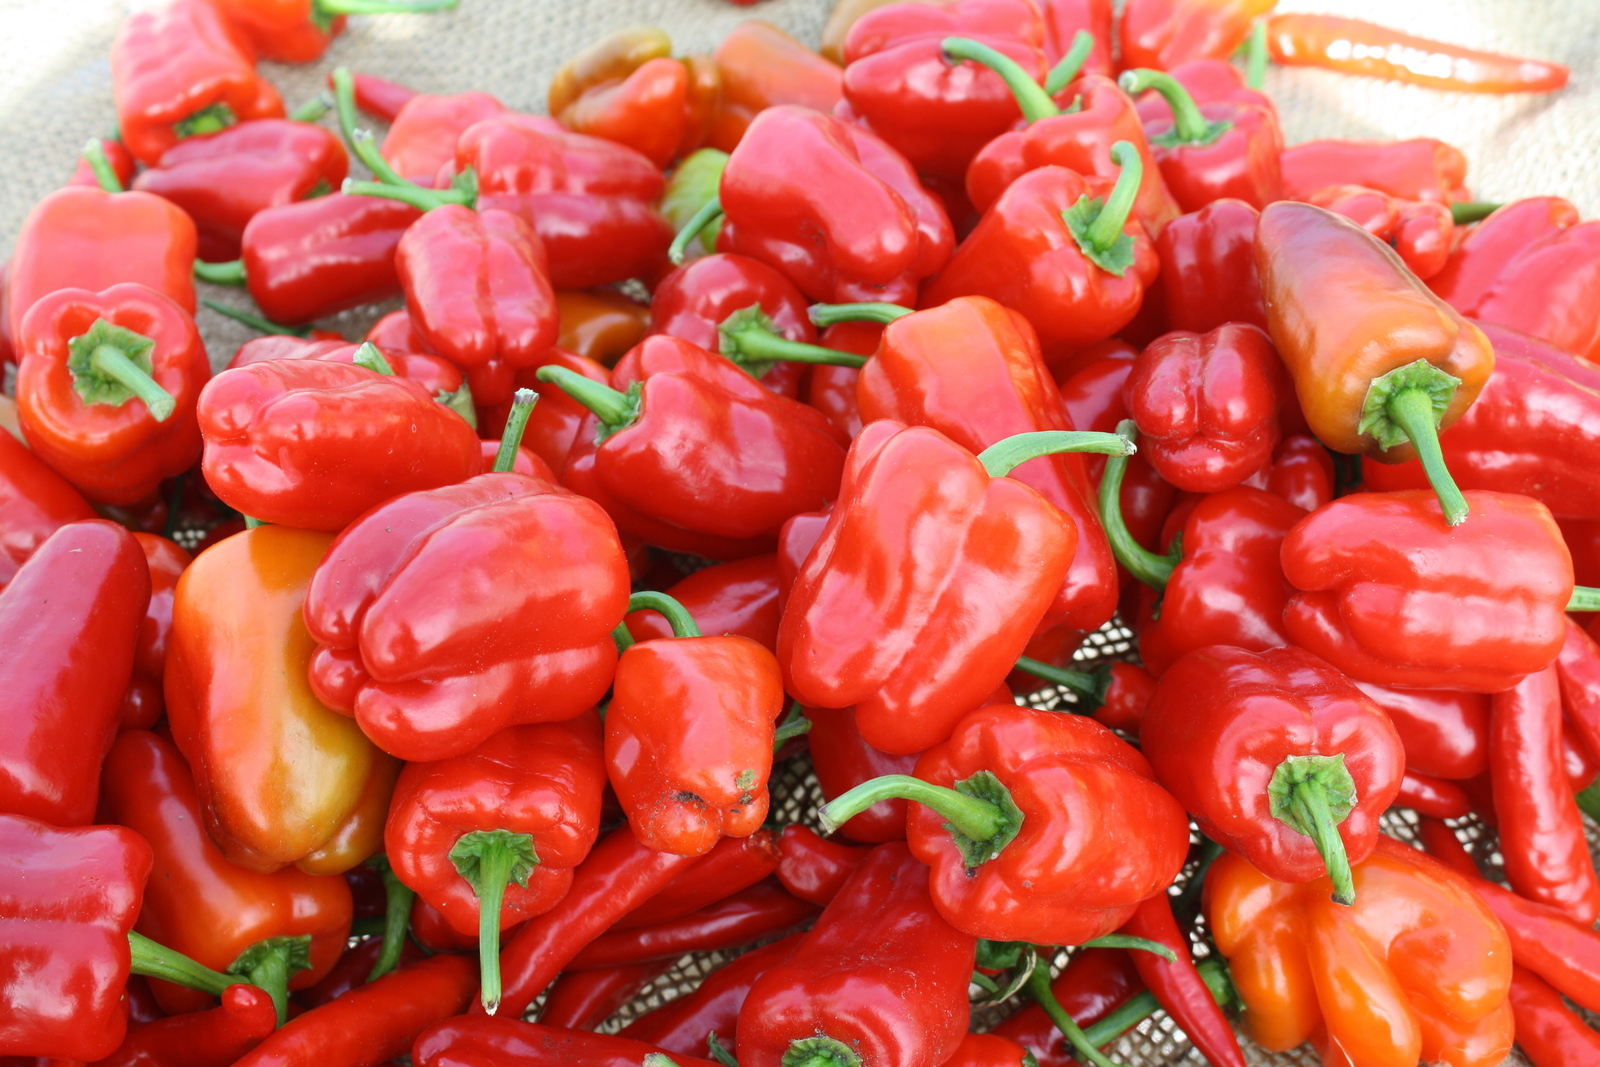 Bell Pepper 'Cajun Belle' Vegetable Seeds, sweet with a touch of spicy heat vege - $10.96